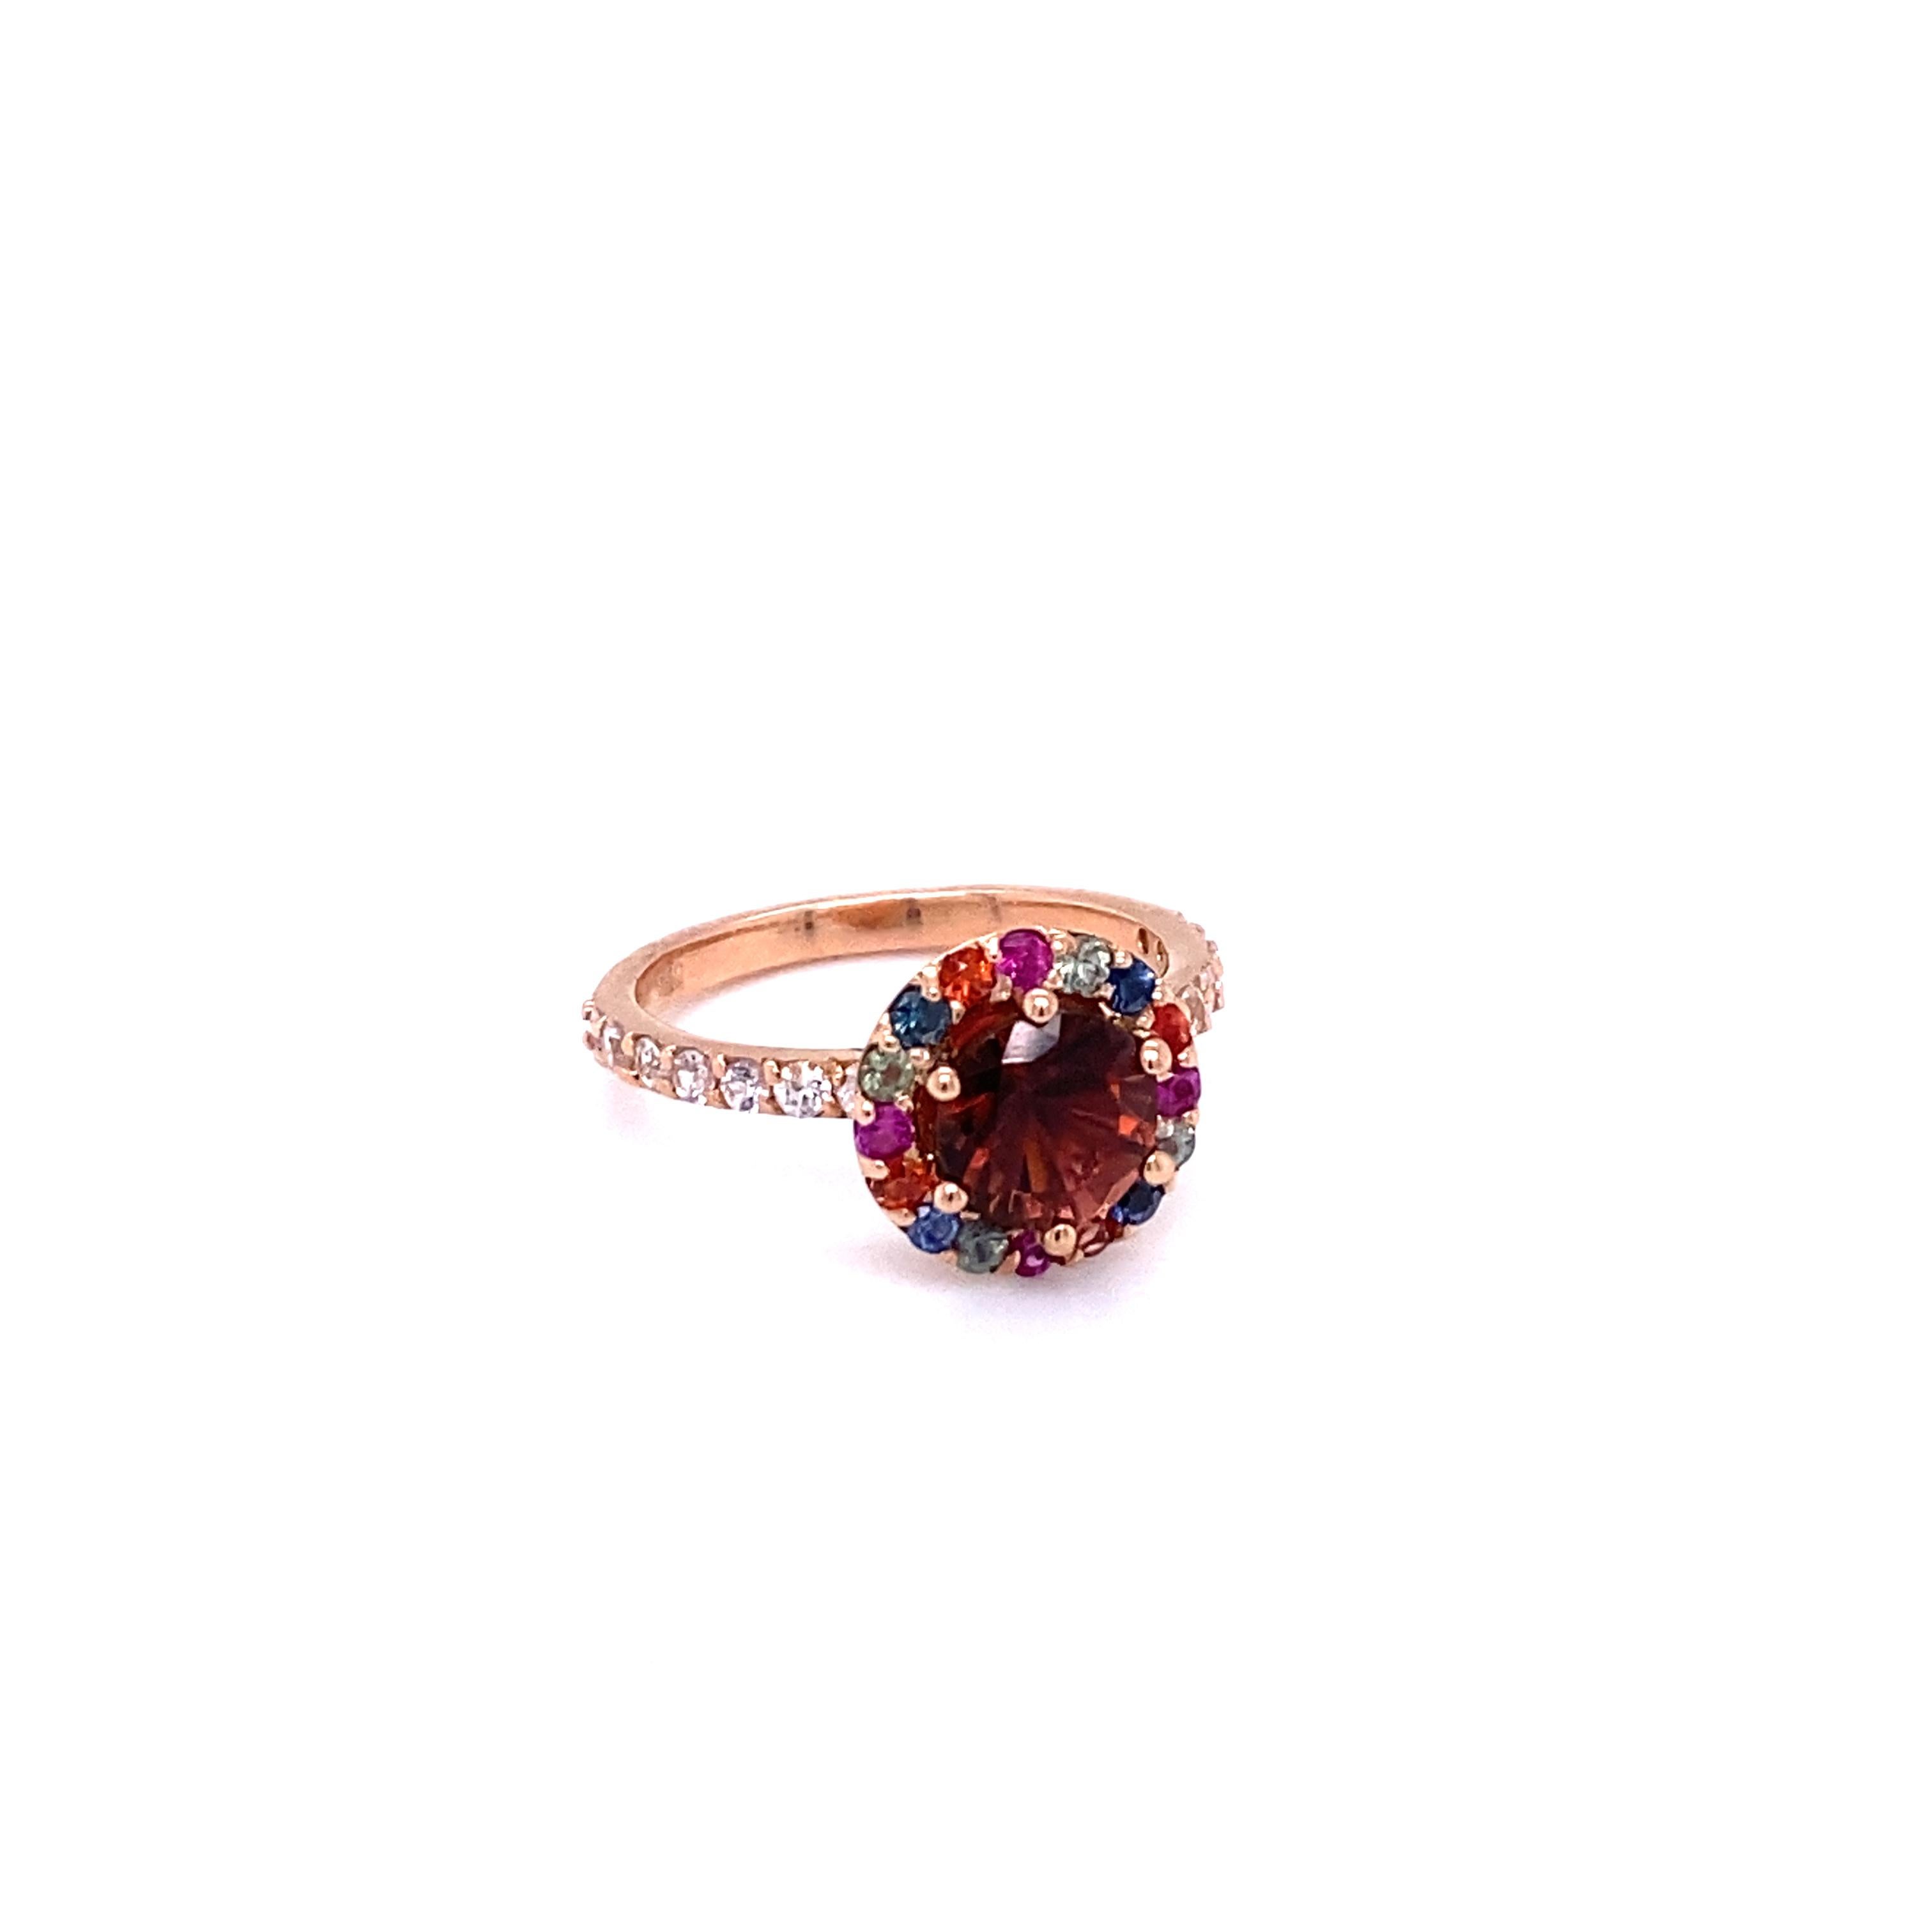 2.33 Carat Tourmaline Sapphire Rose Gold Cocktail Ring

This ring has a 1.43 carat Round Cut Tourmaline that is set in the center of the ring and is surrounded by 16 Multi-Sapphires that weigh 0.48 carats and 14 White Sapphires along the shank of